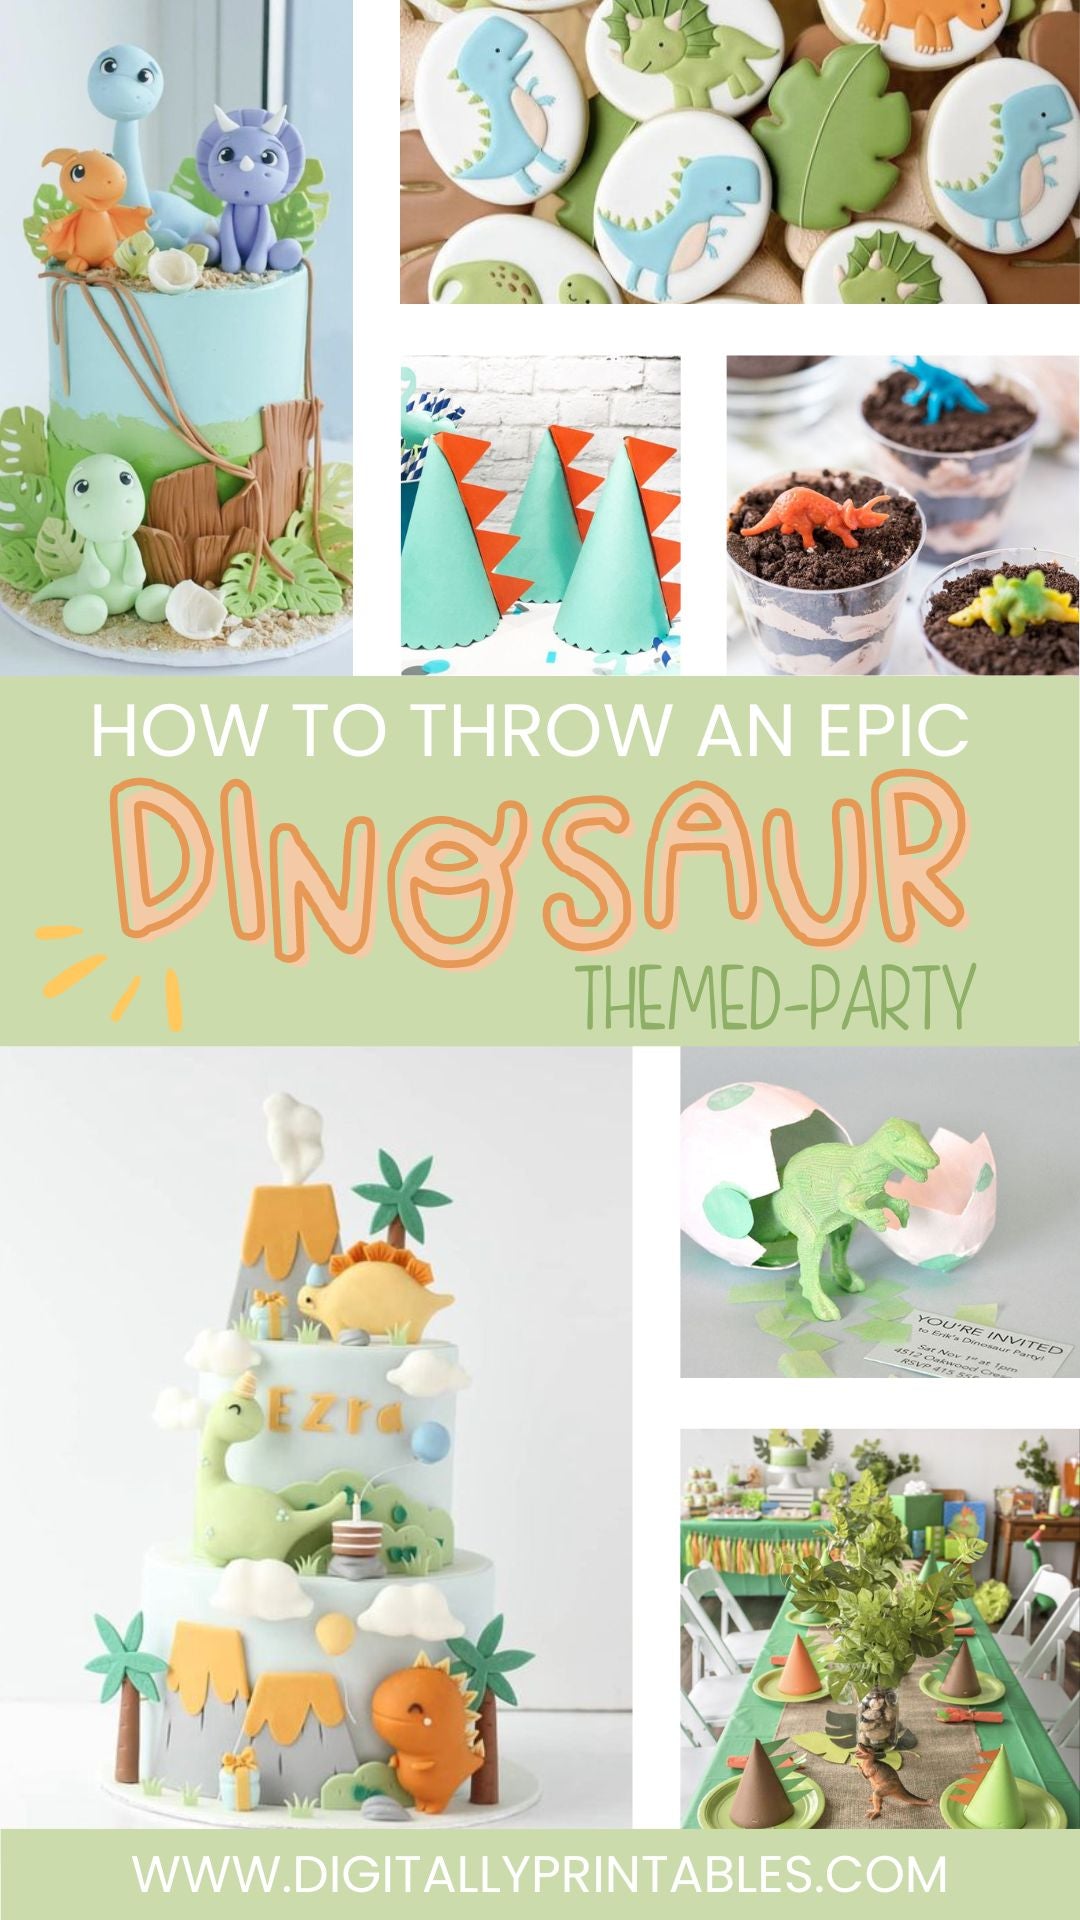 How to Throw the Ultimate Dinosaur Party! - Make Life Lovely